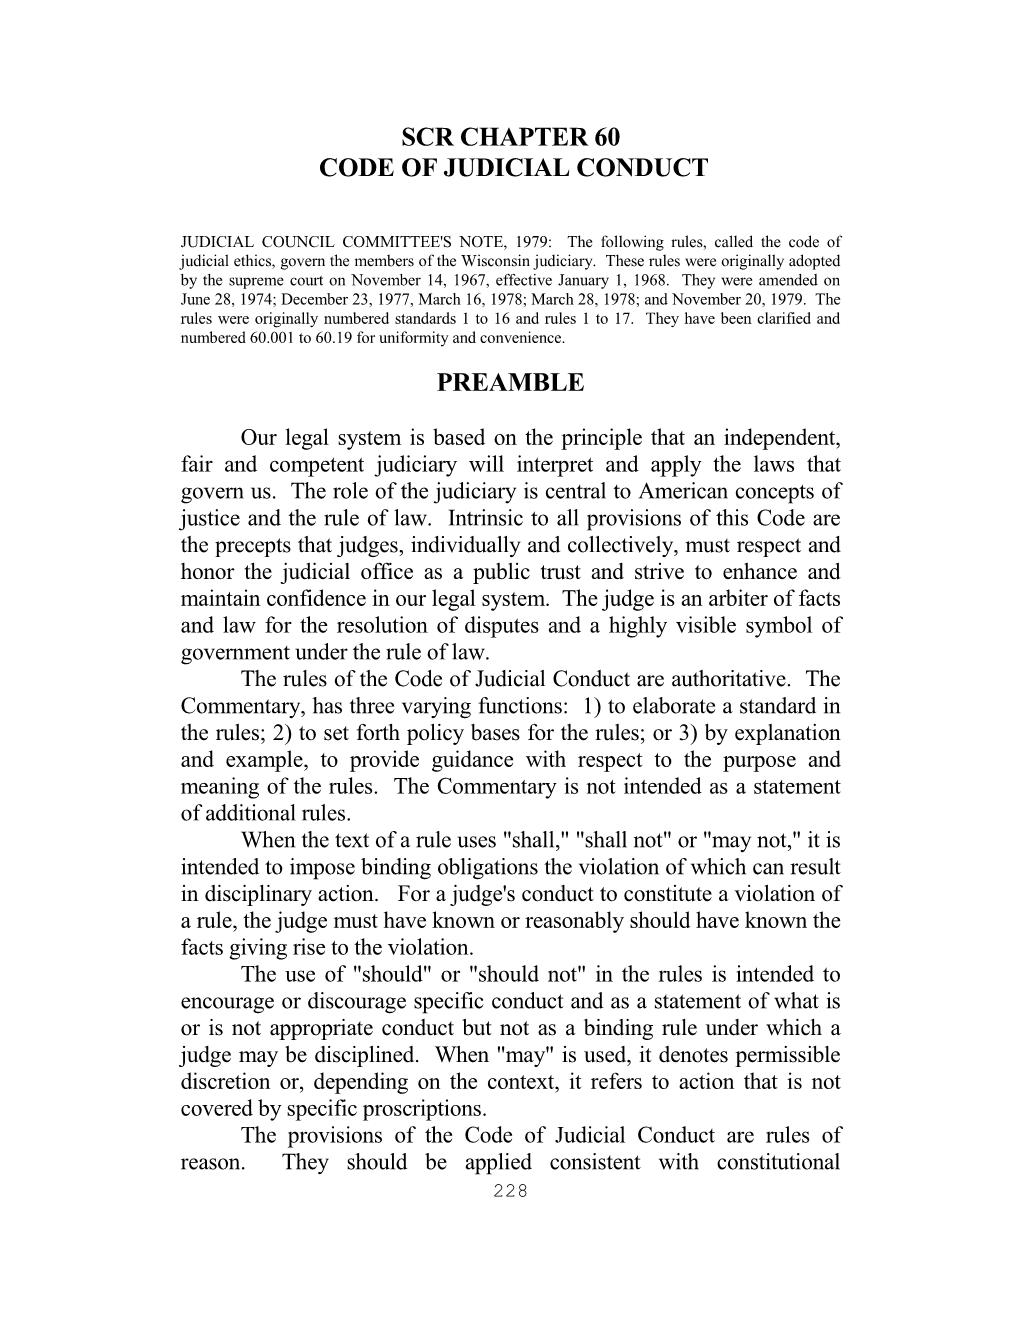 Scr Chapter 60 Code of Judicial Conduct